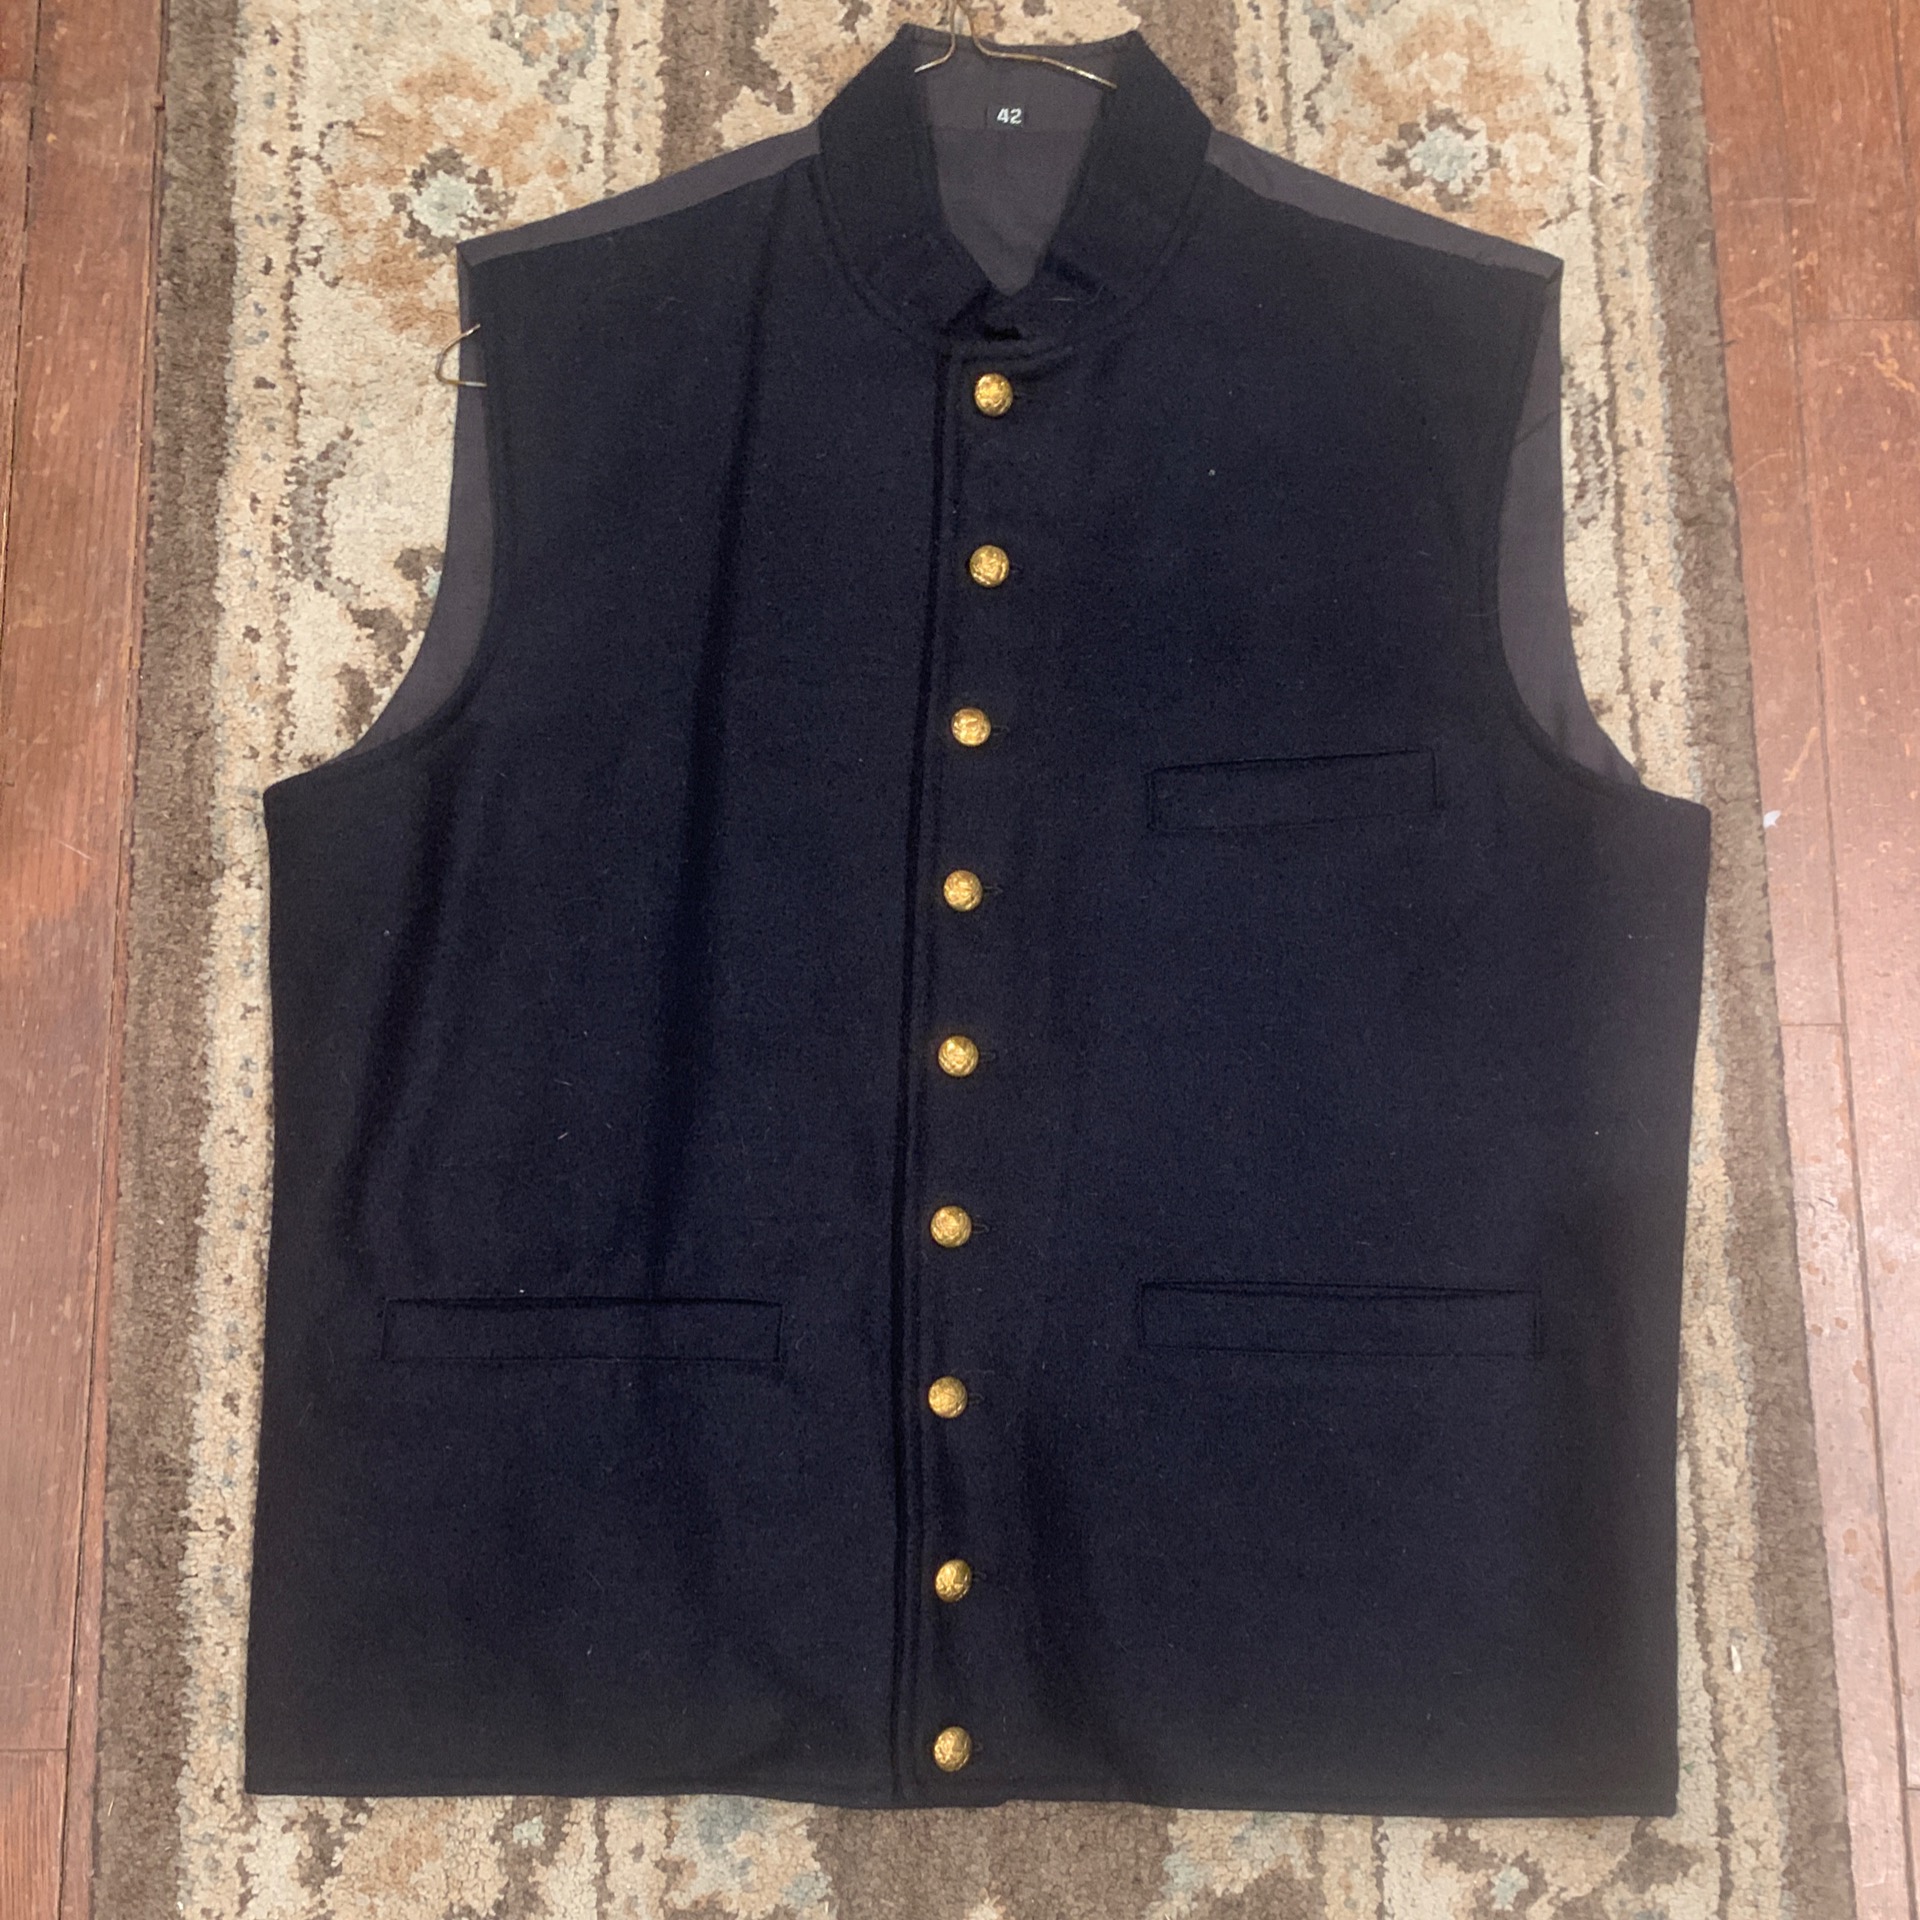 Vest, Union Military navy blue wool - The Maryland Sutler